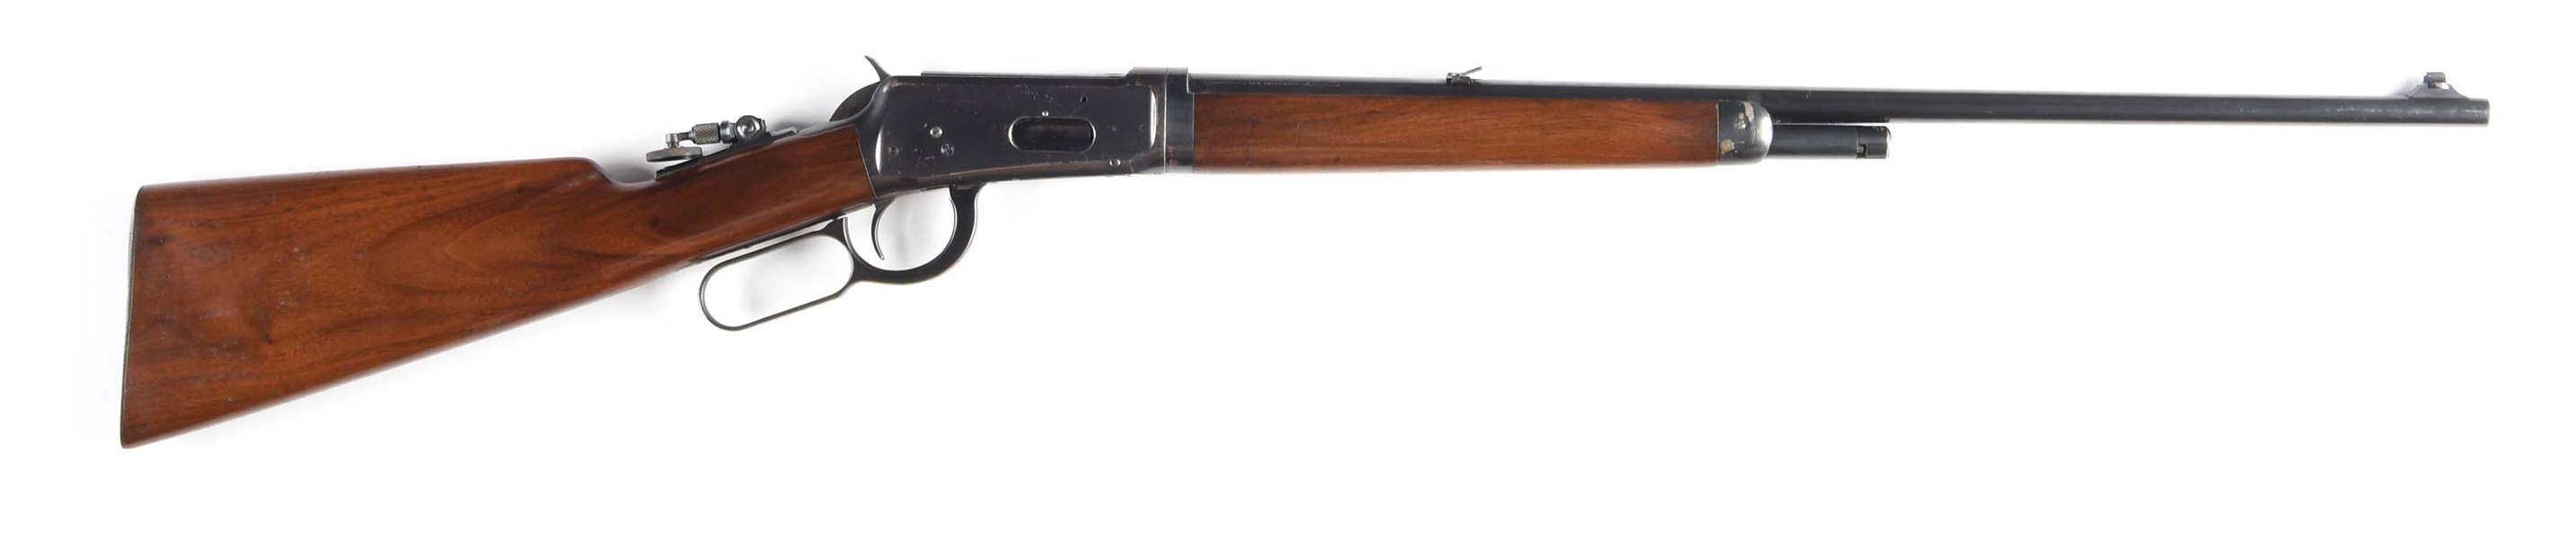 (C) WINCHESTER MODEL 55 TAKEDOWN LEVER ACTION RIFLE (1929).